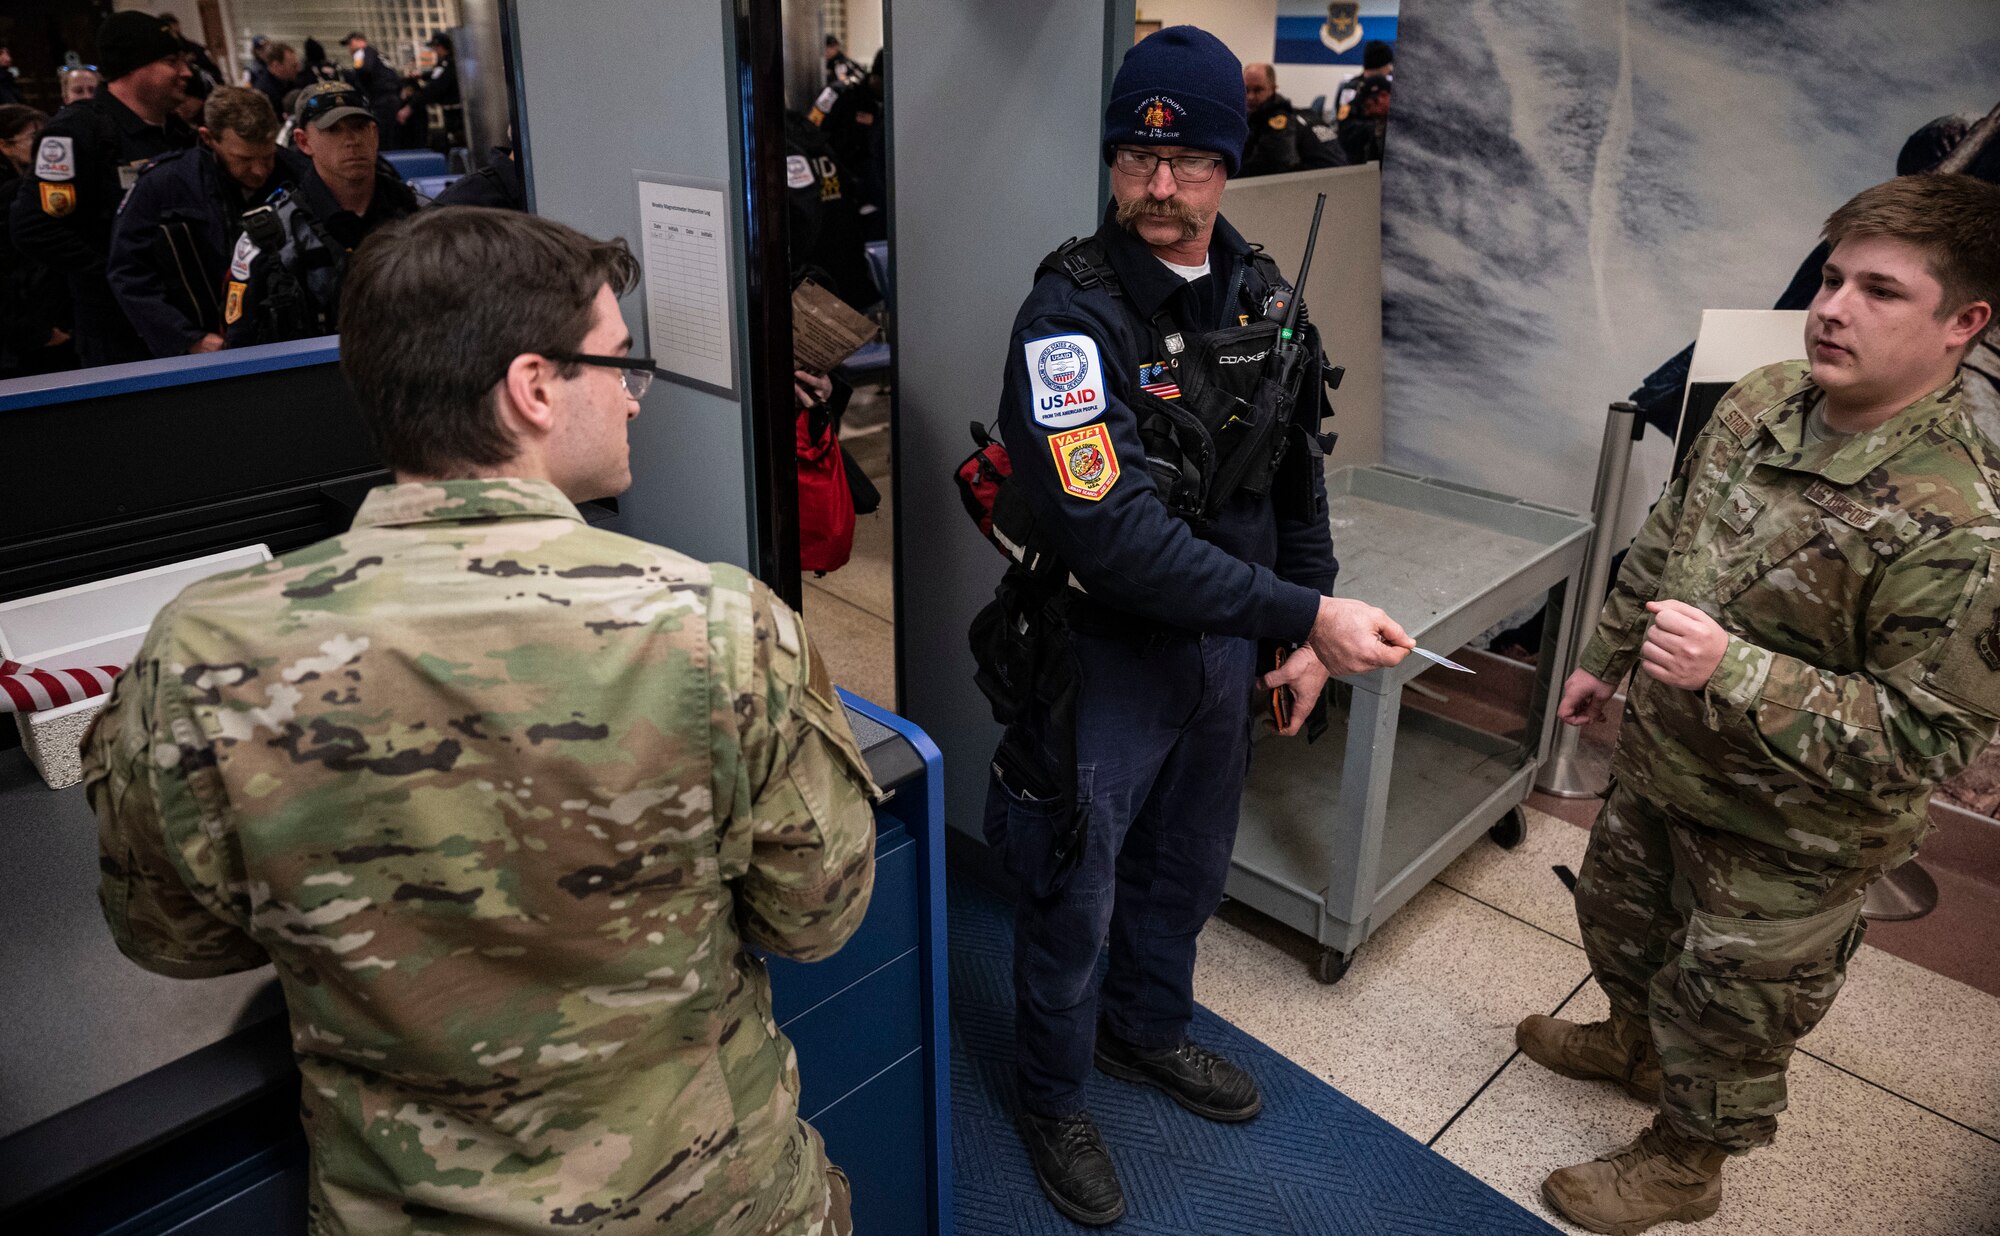 Airman Donovan Harris, left, and Airman 1st Class Jayden Stroup, right, 436th Aerial Port Squadron passenger service representatives, verify names of Urban Search and Rescue personnel from Fairfax County, Virginia, prior to boarding a C-17 Globemaster III on Dover Air Force Base, Delaware, Feb. 7, 2023. The U.S. Agency for International Development (USAID) is mobilizing emergency humanitarian assistance to respond to the devastating impacts in Türkiye following the worst earthquake to hit the region in almost a century. (U.S. Air Force photo by Staff Sgt. Marco A. Gomez)